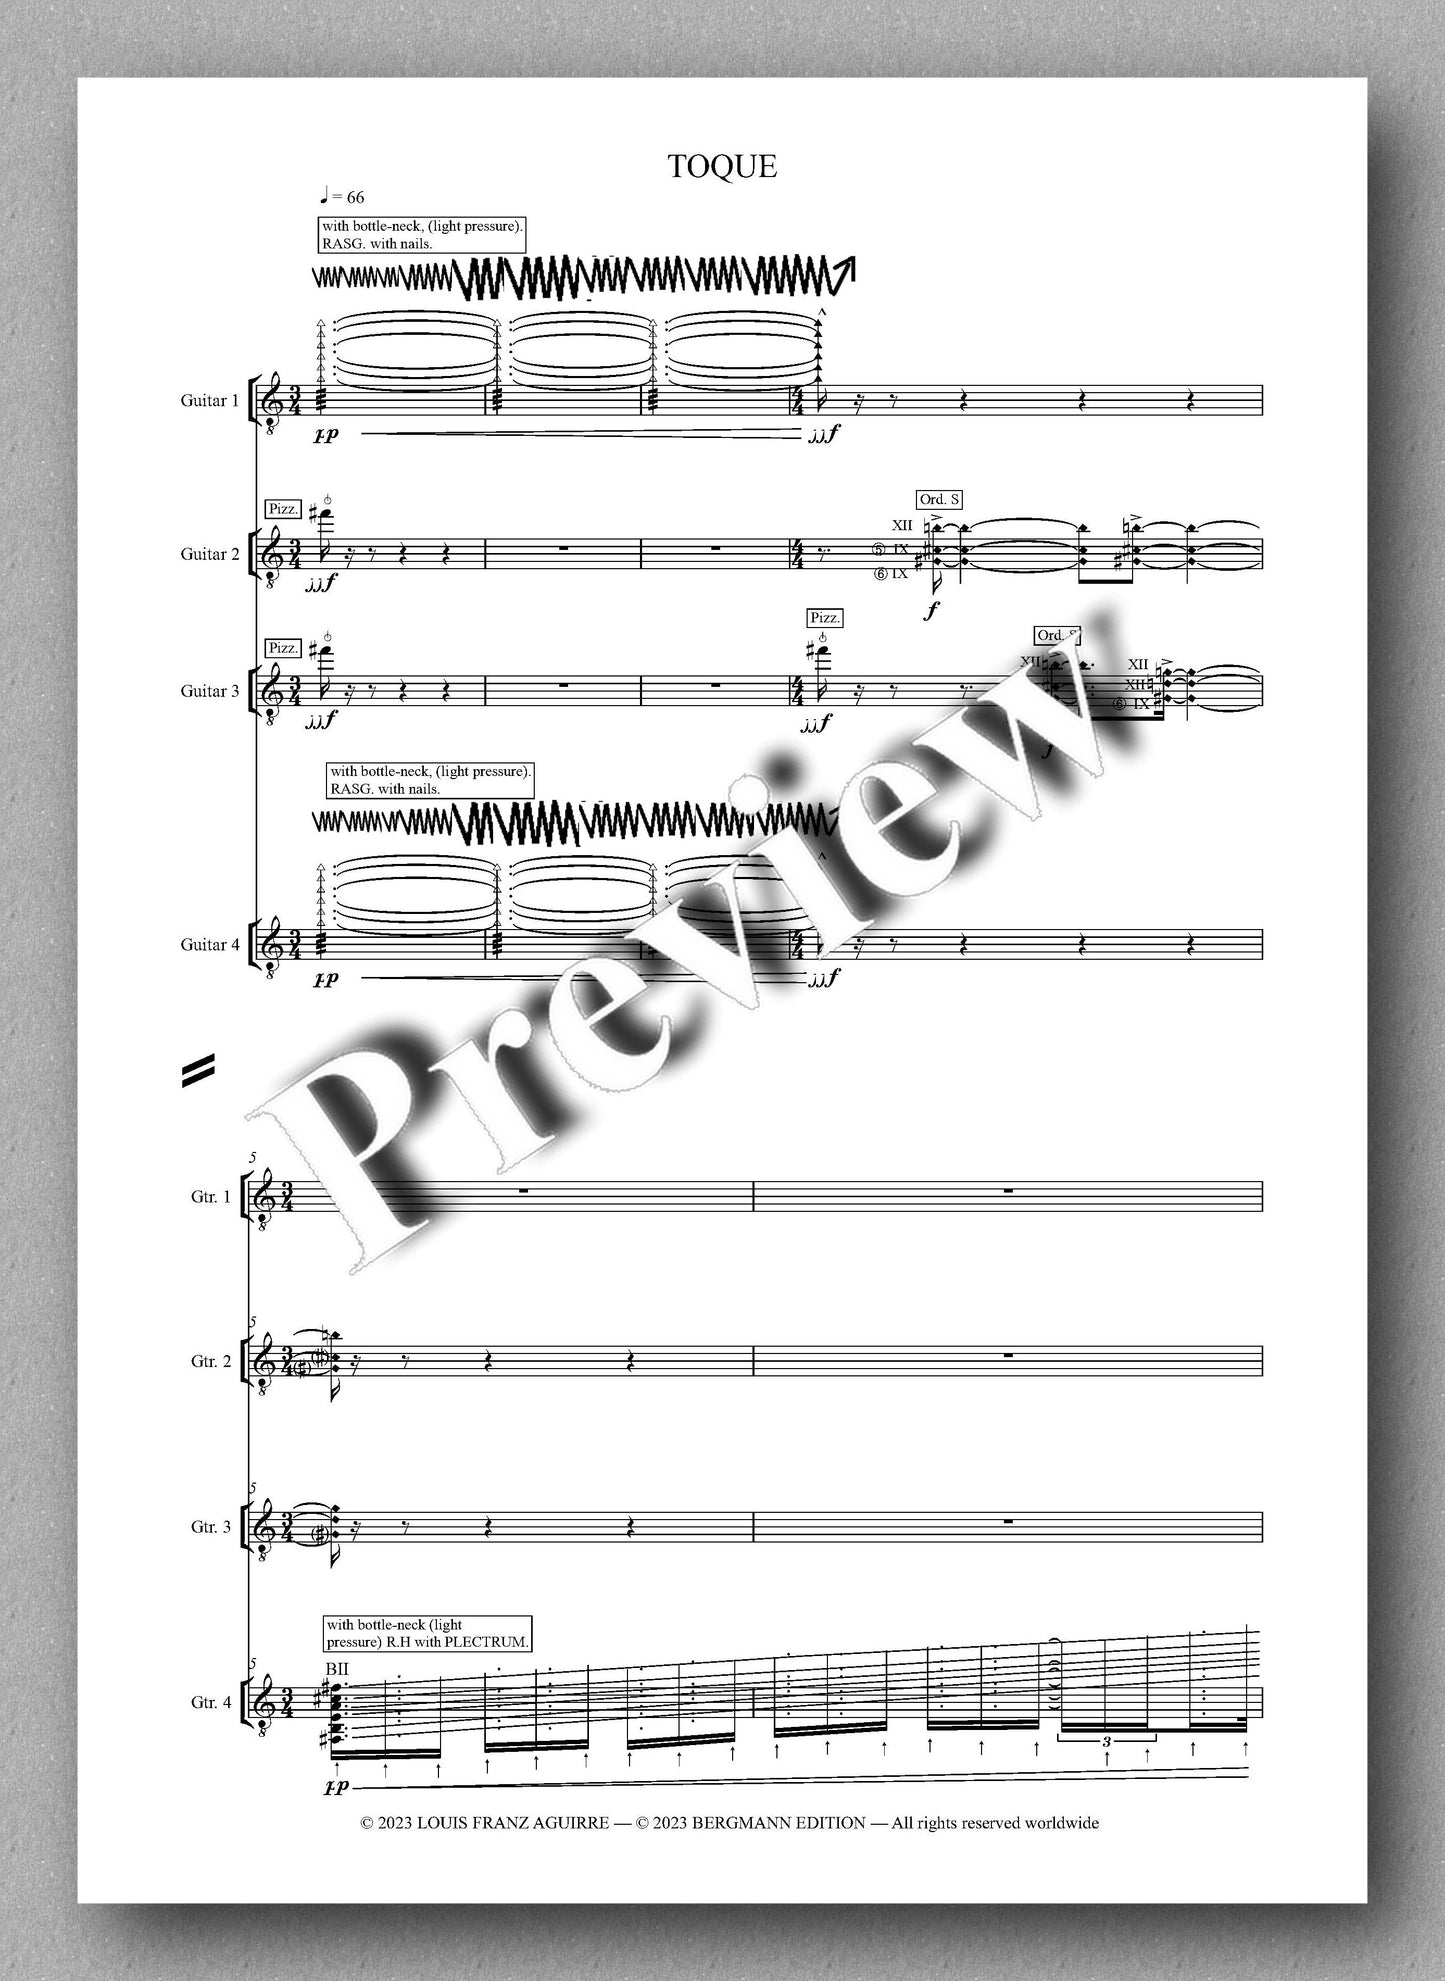 Louis Franz Aguirre, TOQUE - preview of the music score 1